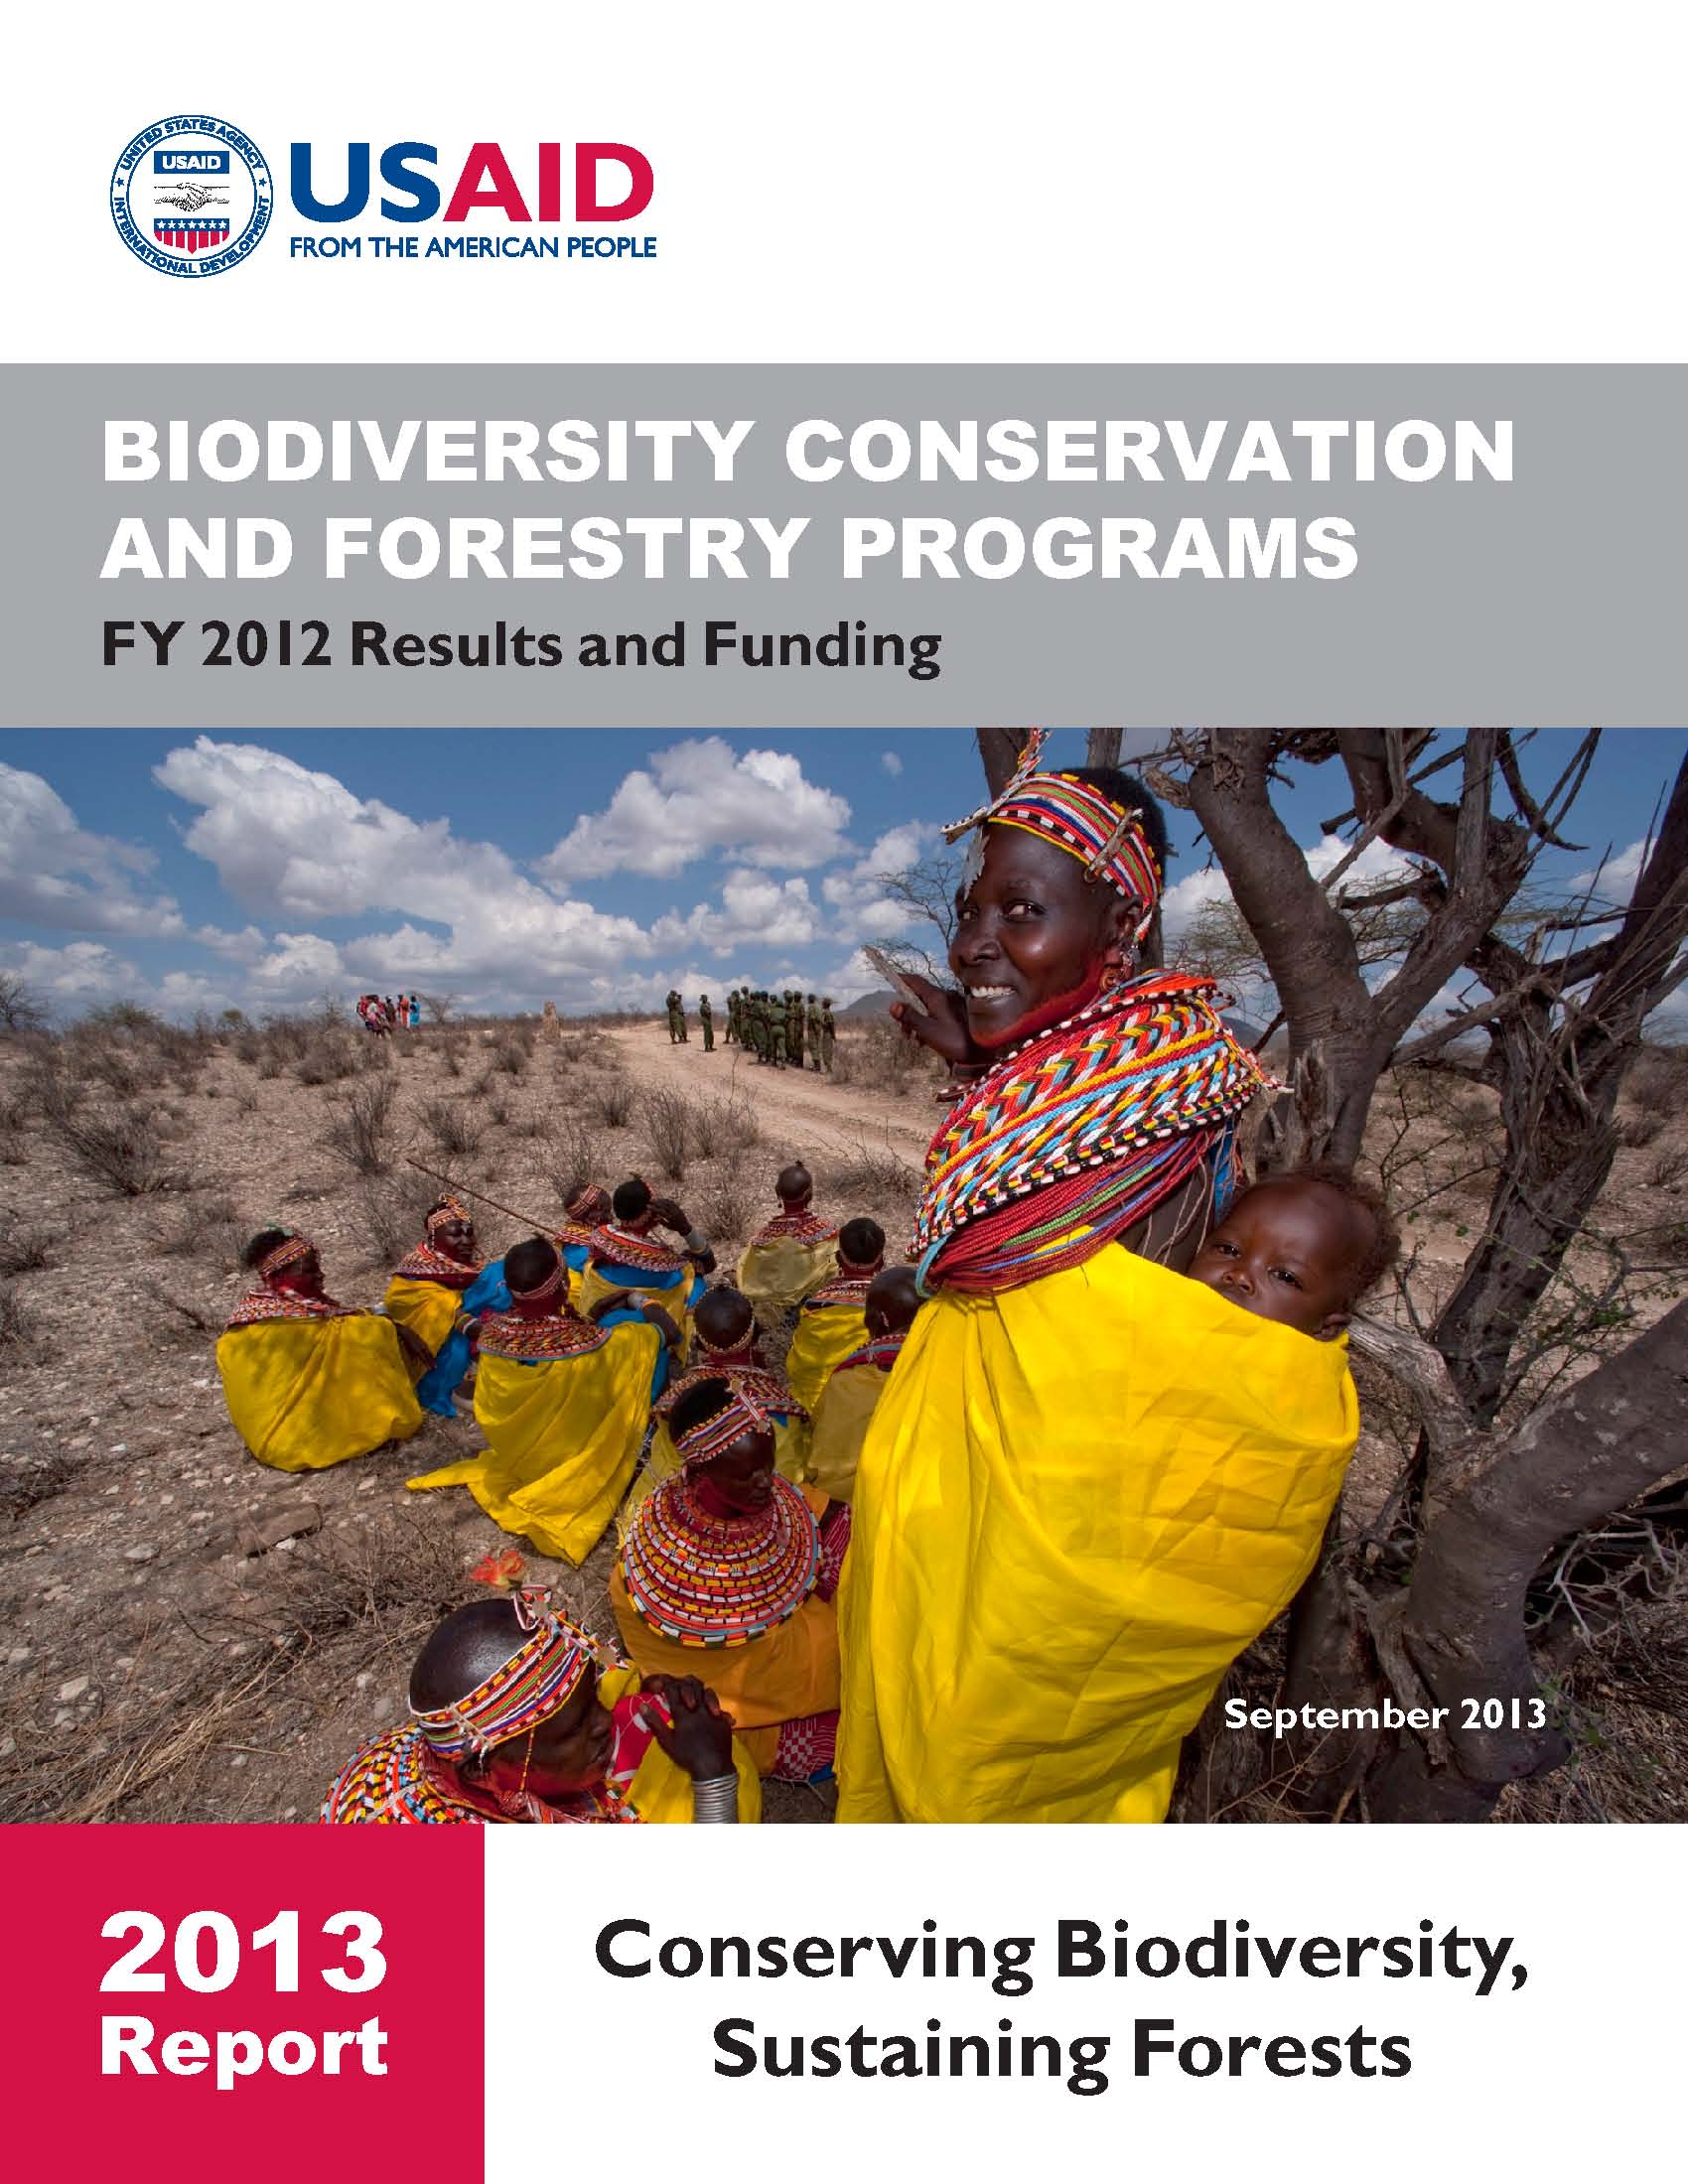 USAID's Biodiversity Conservation and Forestry Programs, 2013 Report